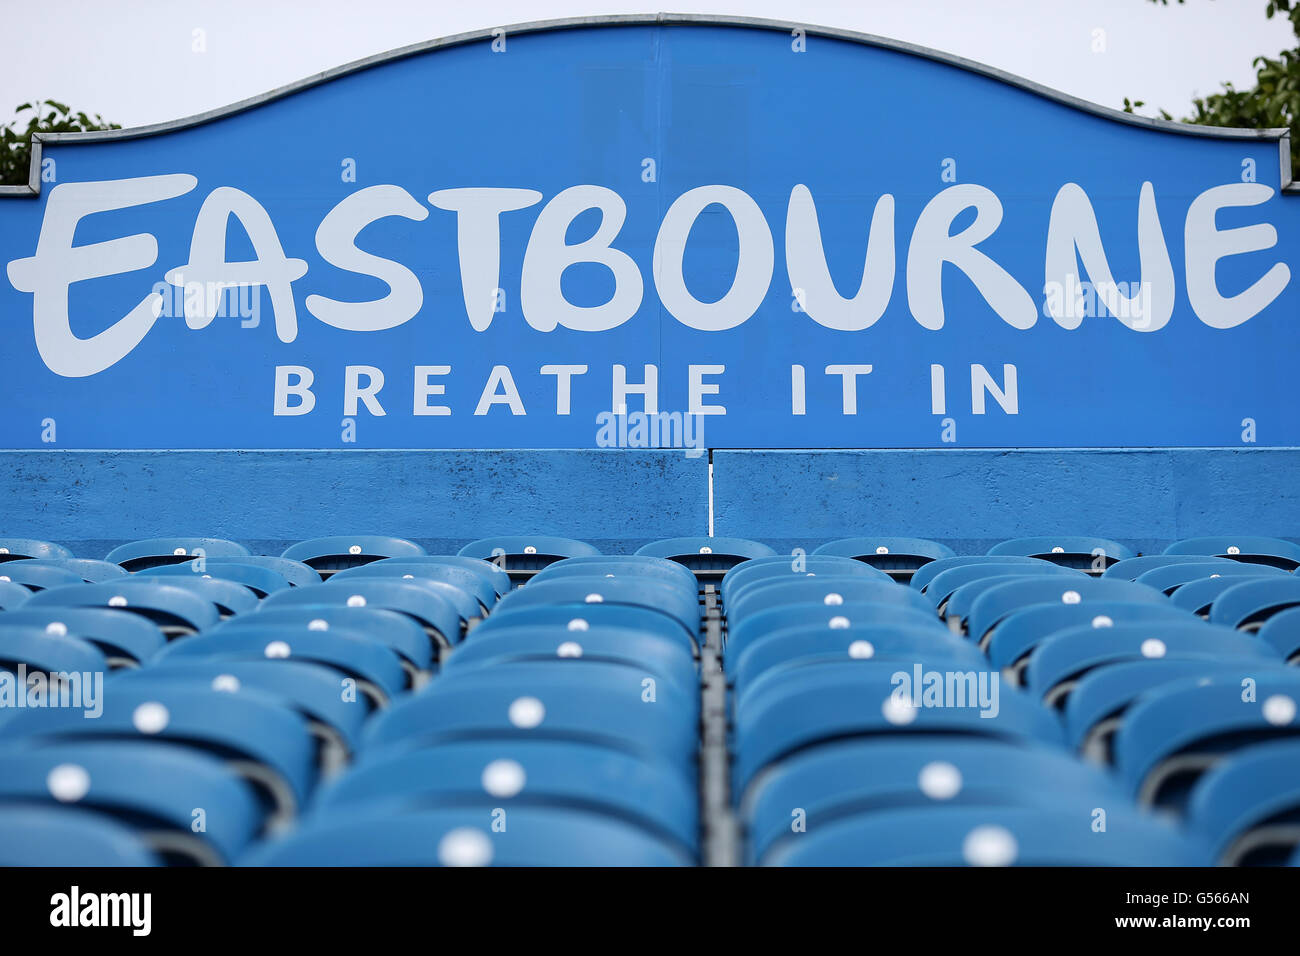 General view of centre court during day one of the 2016 AEGON International at Devonshire Park, Eastbourne. PRESS ASSOCIATION Photo. Picture date: Monday June 20, 2016. See PA story TENNIS Eastbourne. Photo credit should read: Steve Paston/PA Wire. RESTRICTIONS: Editorial use only, No commercial use without prior permission, please contact PA Images for further information: Tel: +44 (0) 115 8447447. Stock Photo